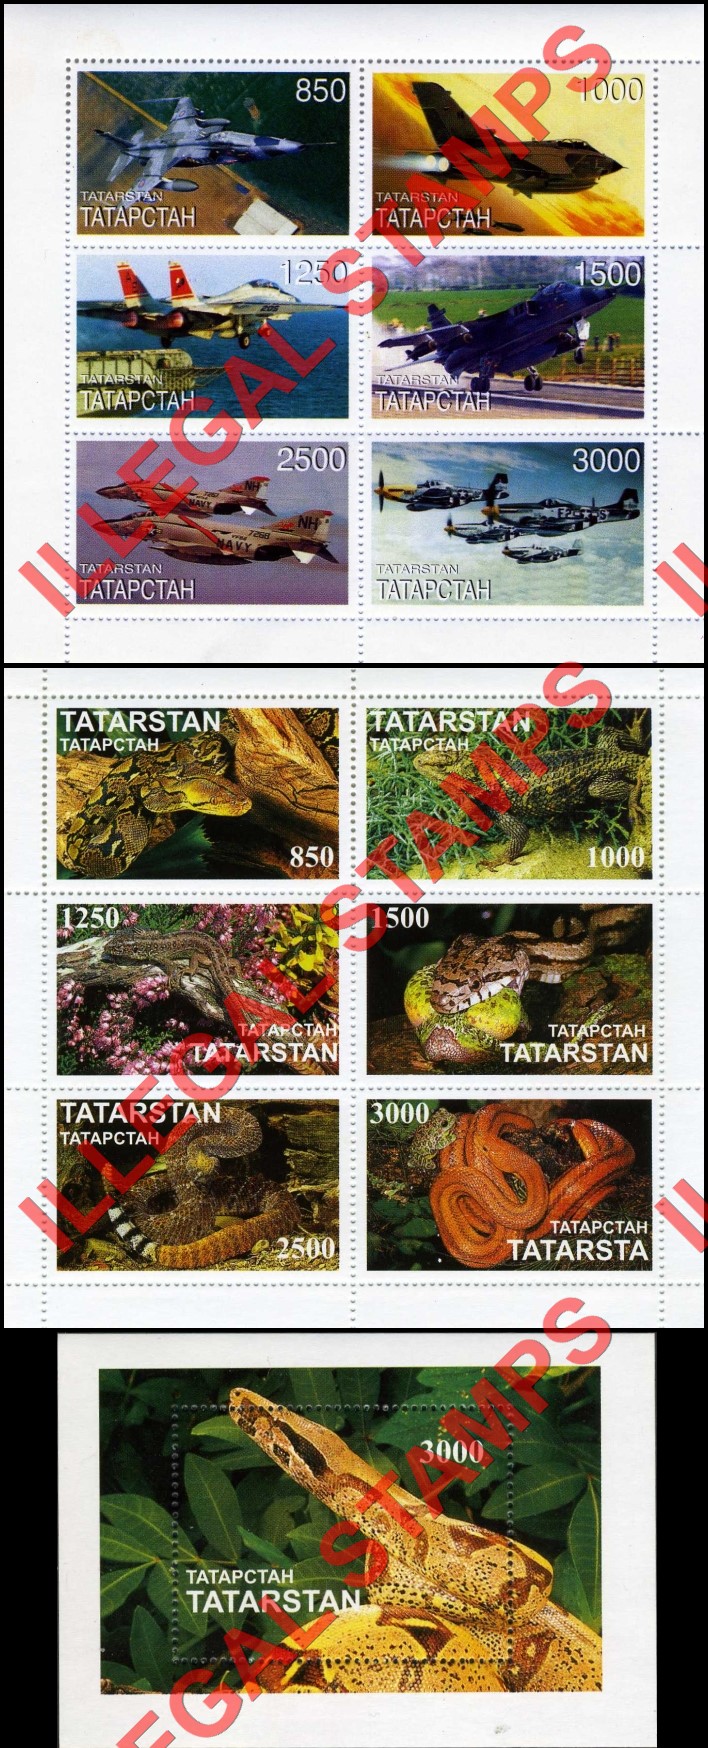 Republic of Tatarstan 1997 Counterfeit Illegal Stamps (Part 2)